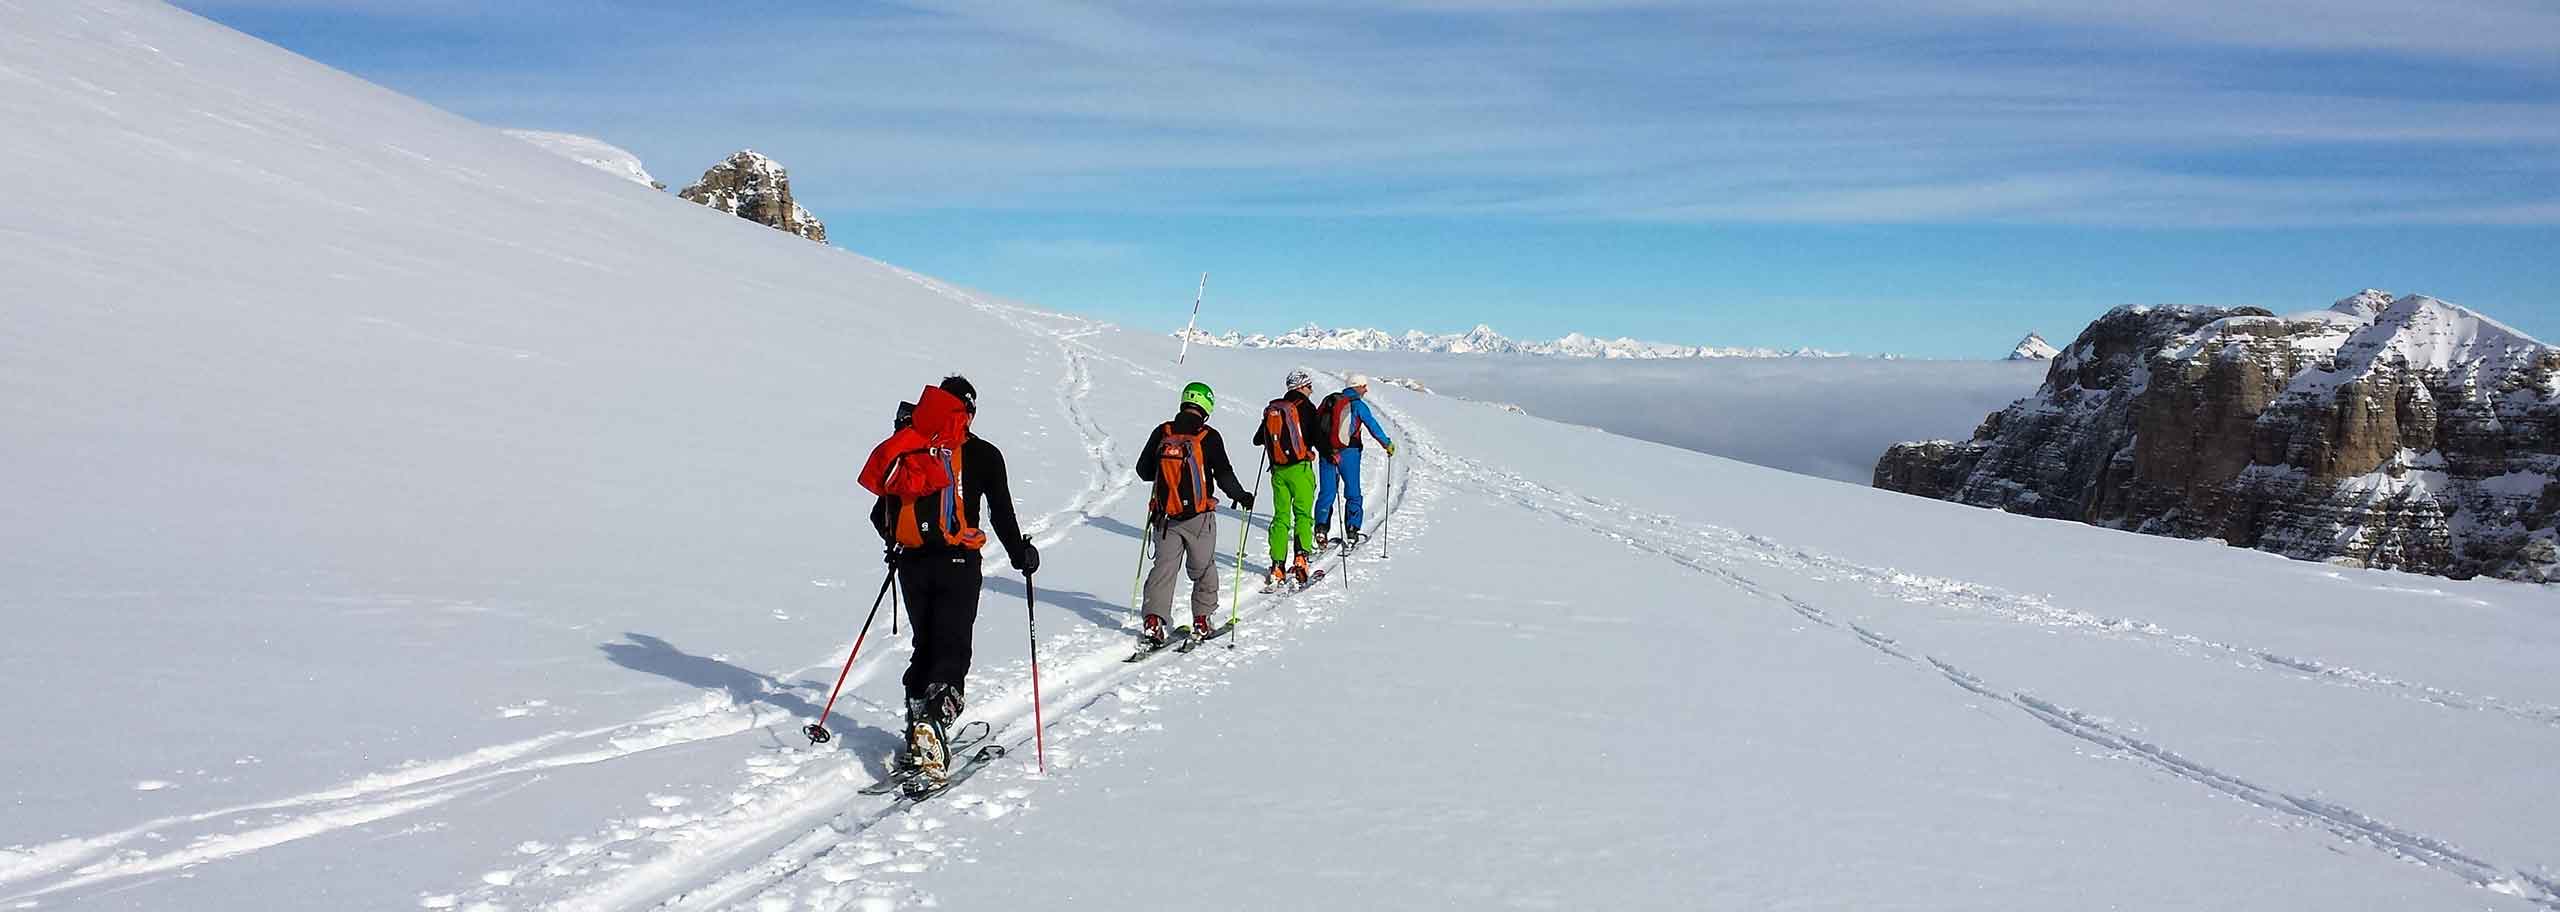 Ski Mountaineering in Arabba, Courses and Trips